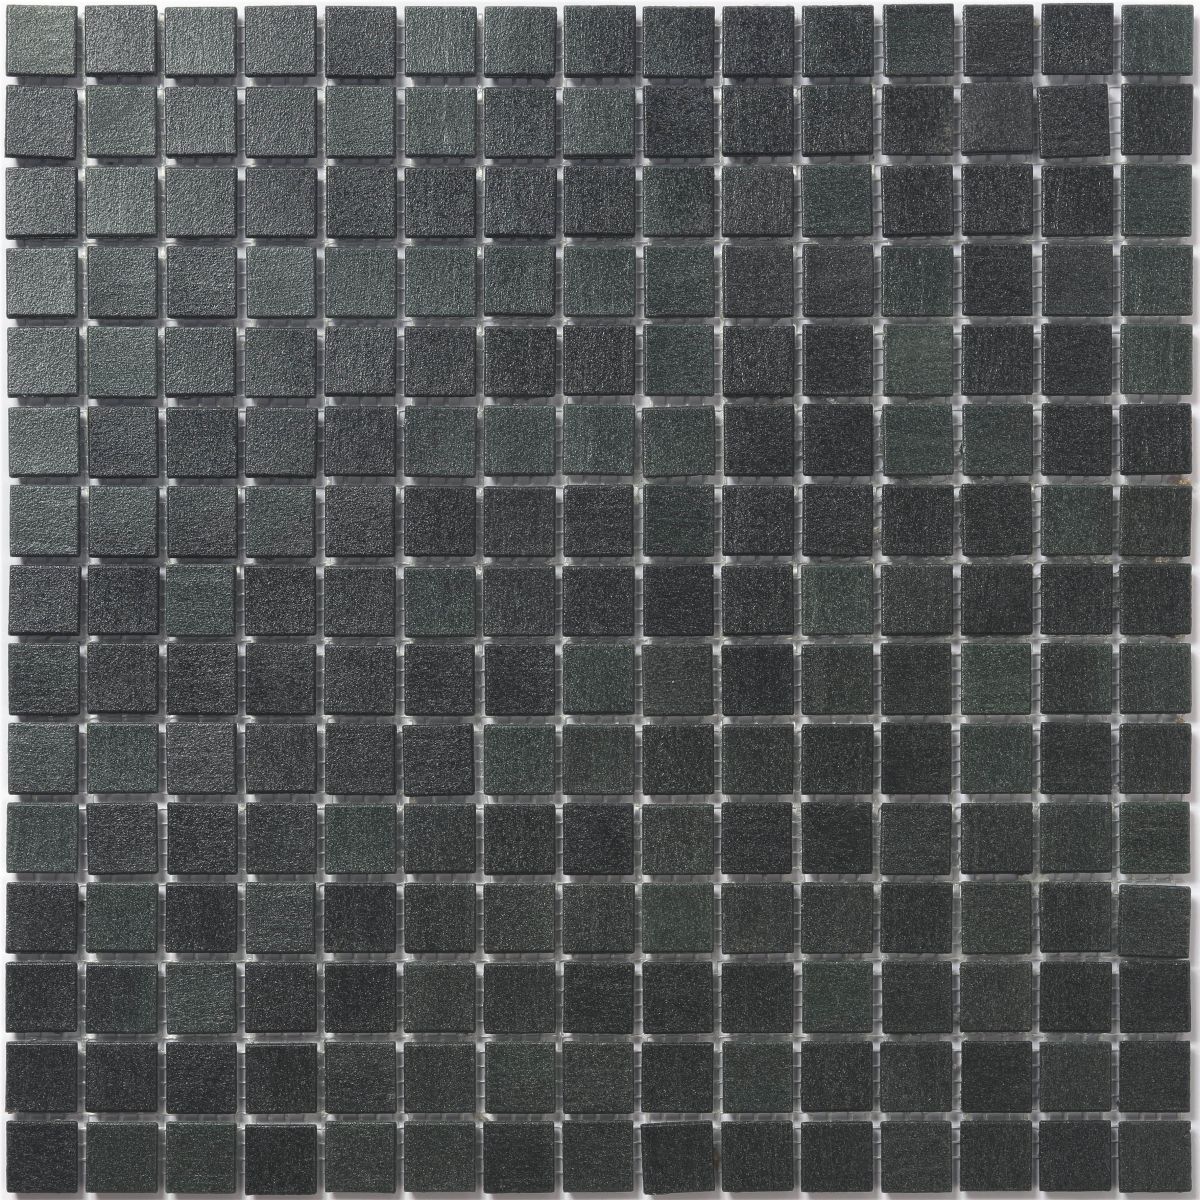 Square Black Mosaic for Kitchen Bathroom Wall Tile